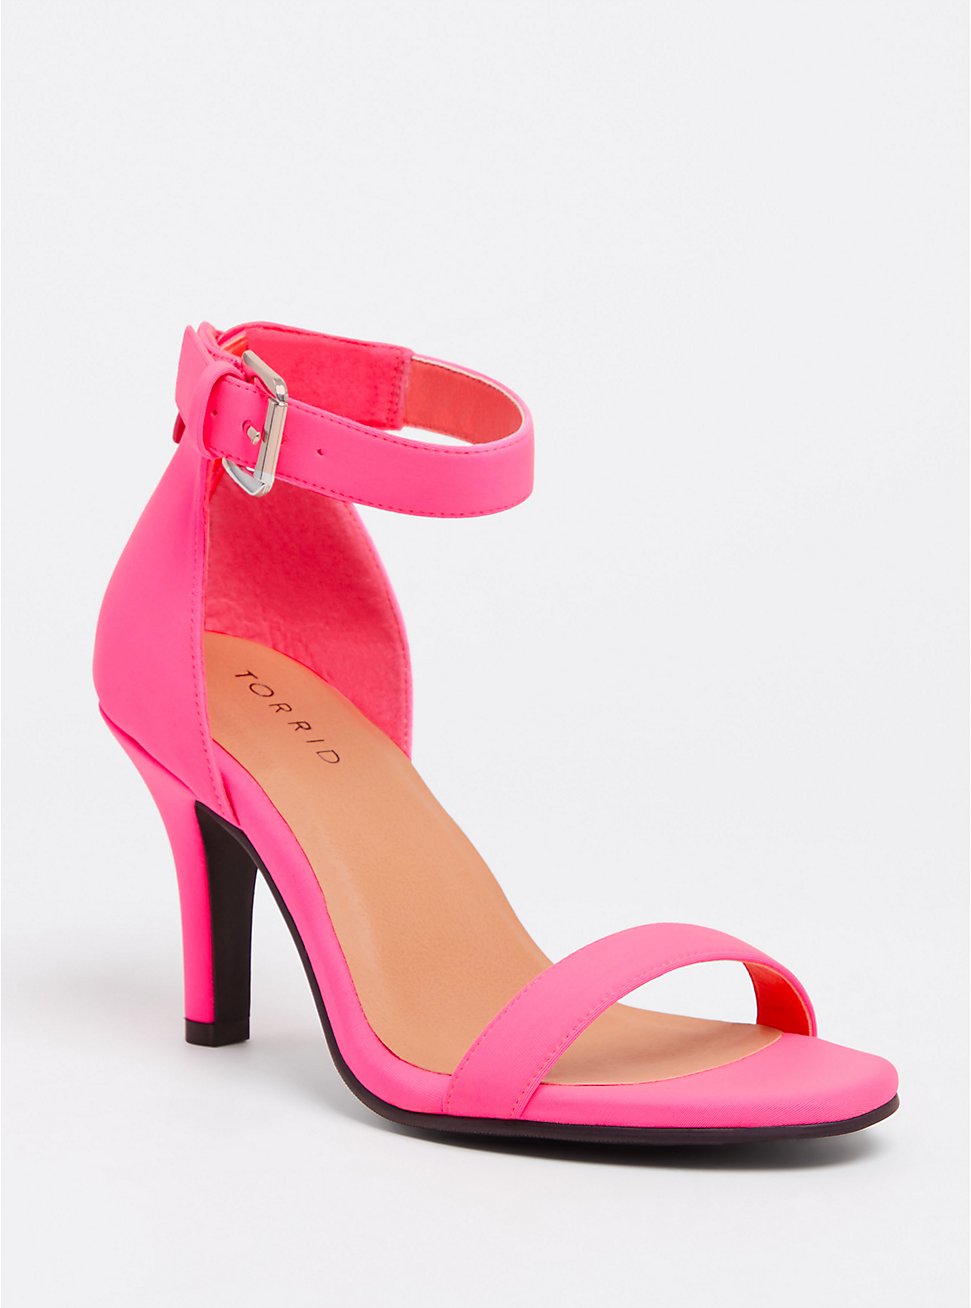 BARBIE SIZE SHOES-NEON PINK ANKLE STRAP HIGH HEELS